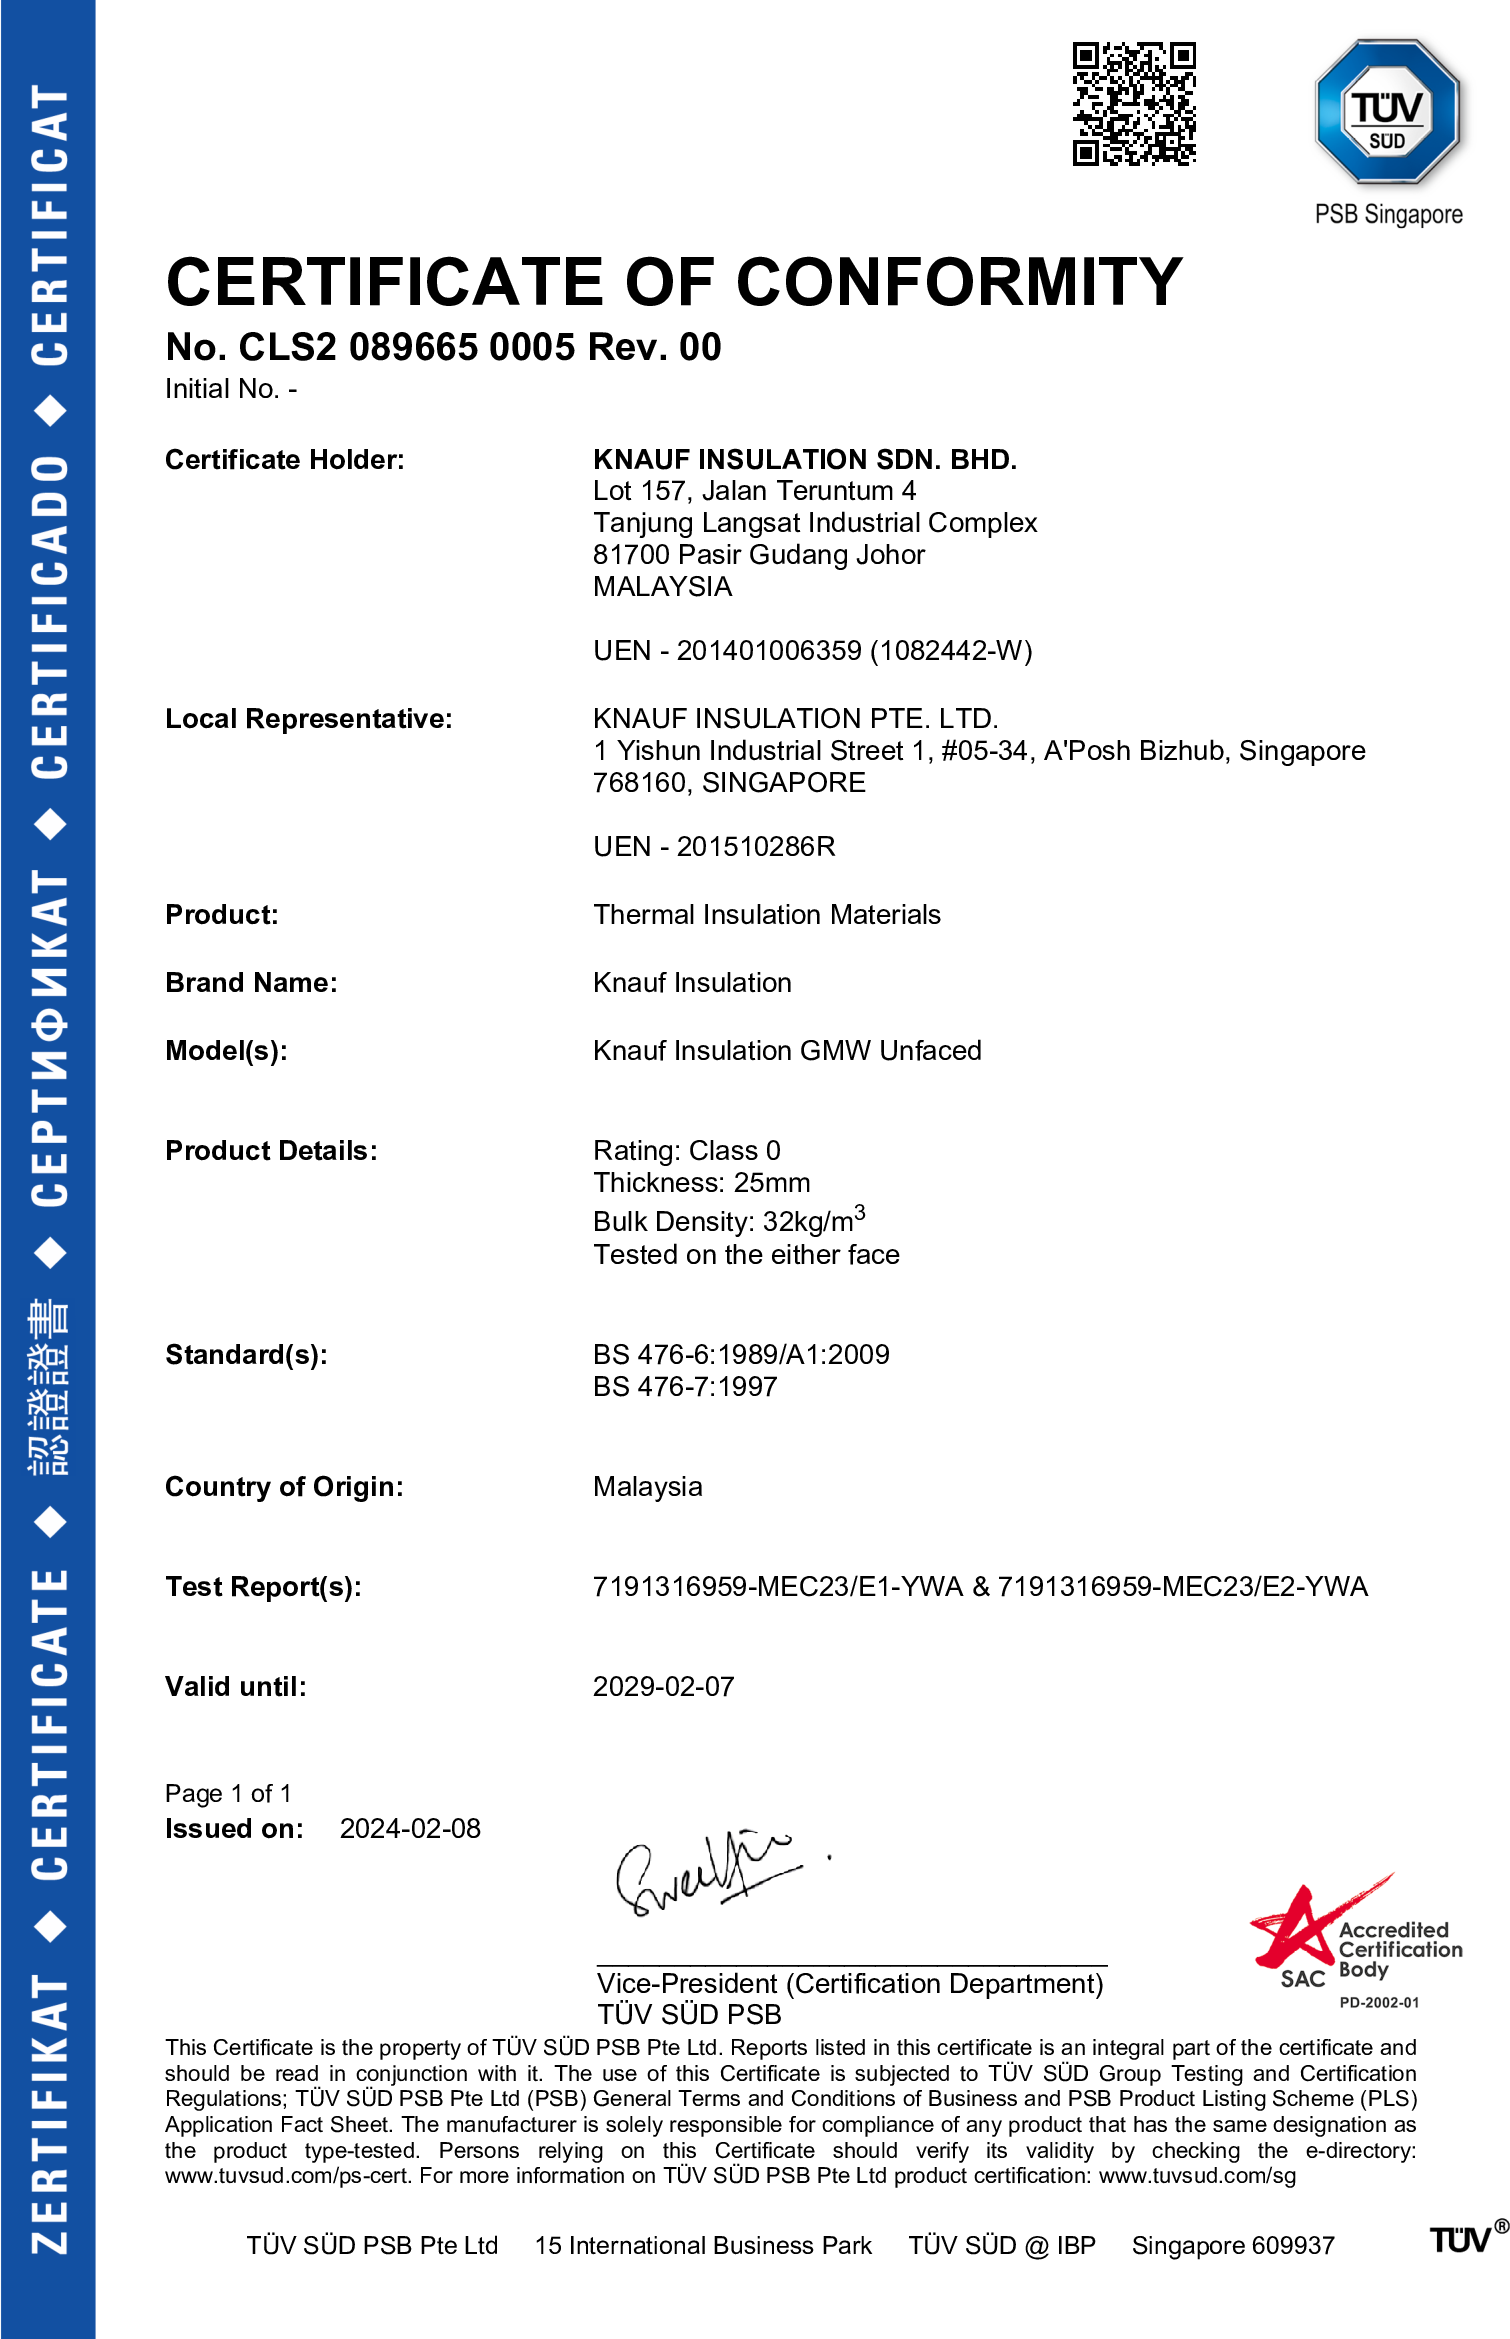 Unfaced Glasswool – Certificate of Conformity – 32kg/m3_25mm_BS476-Part 6 & 7